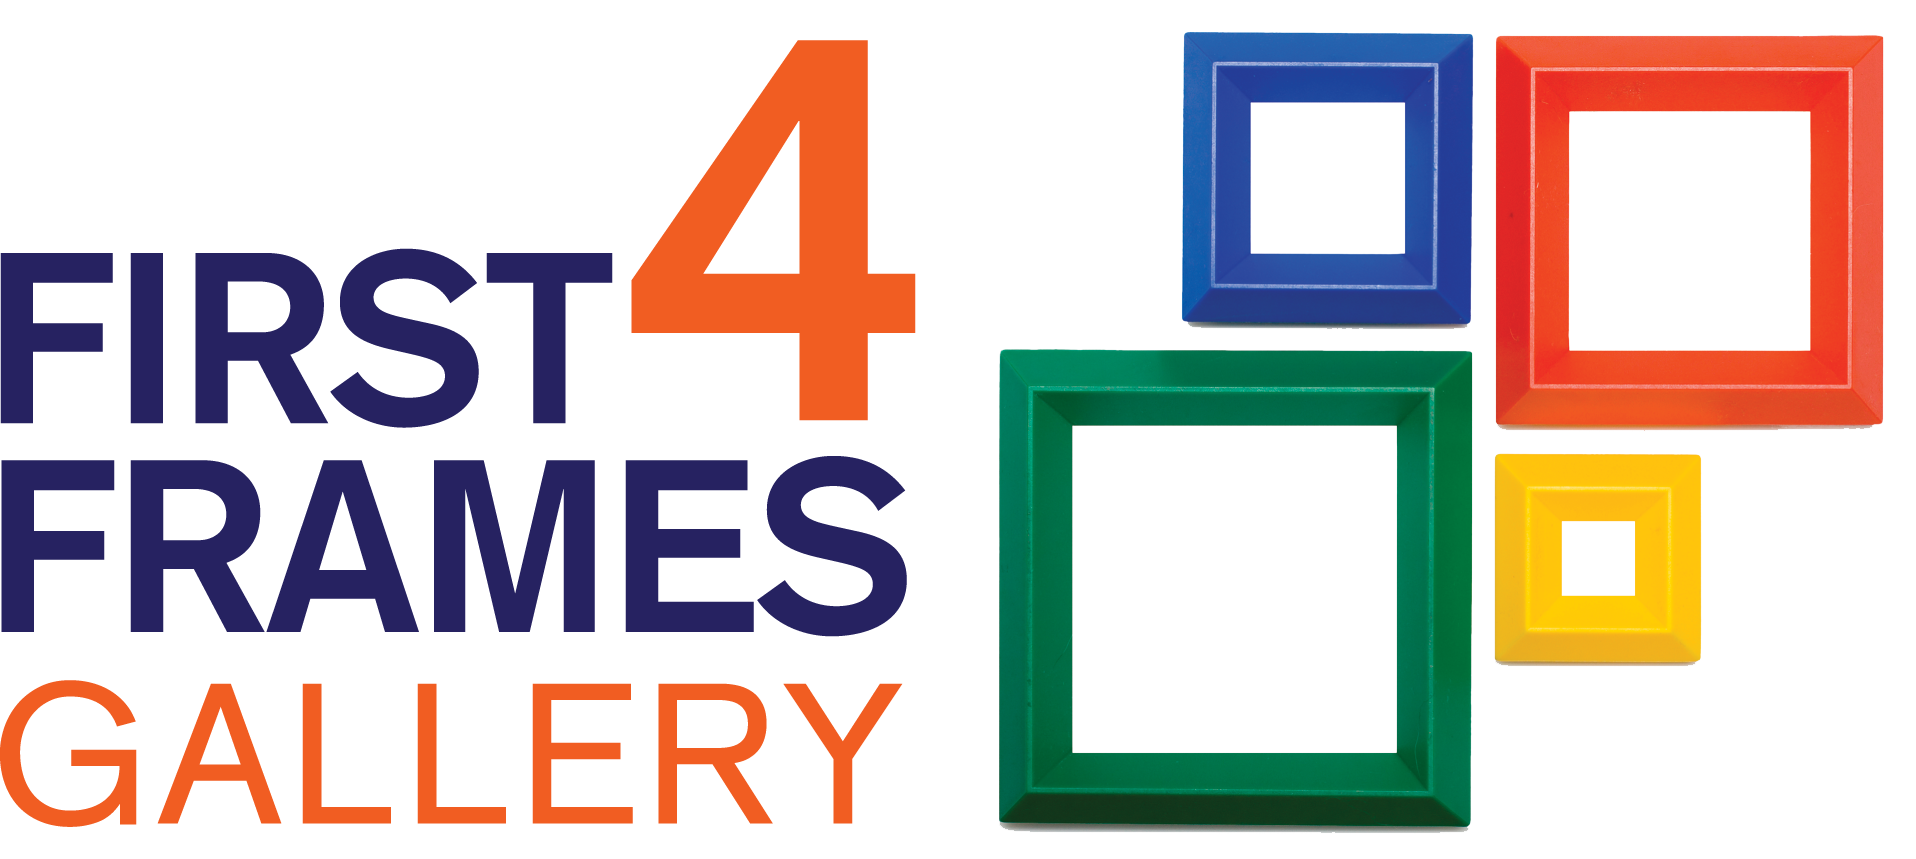 The image shows the text 'FIRST 4 FRAMES GALLERY' accompanied by a colorful arrangement of five empty picture frames decreasing in size.